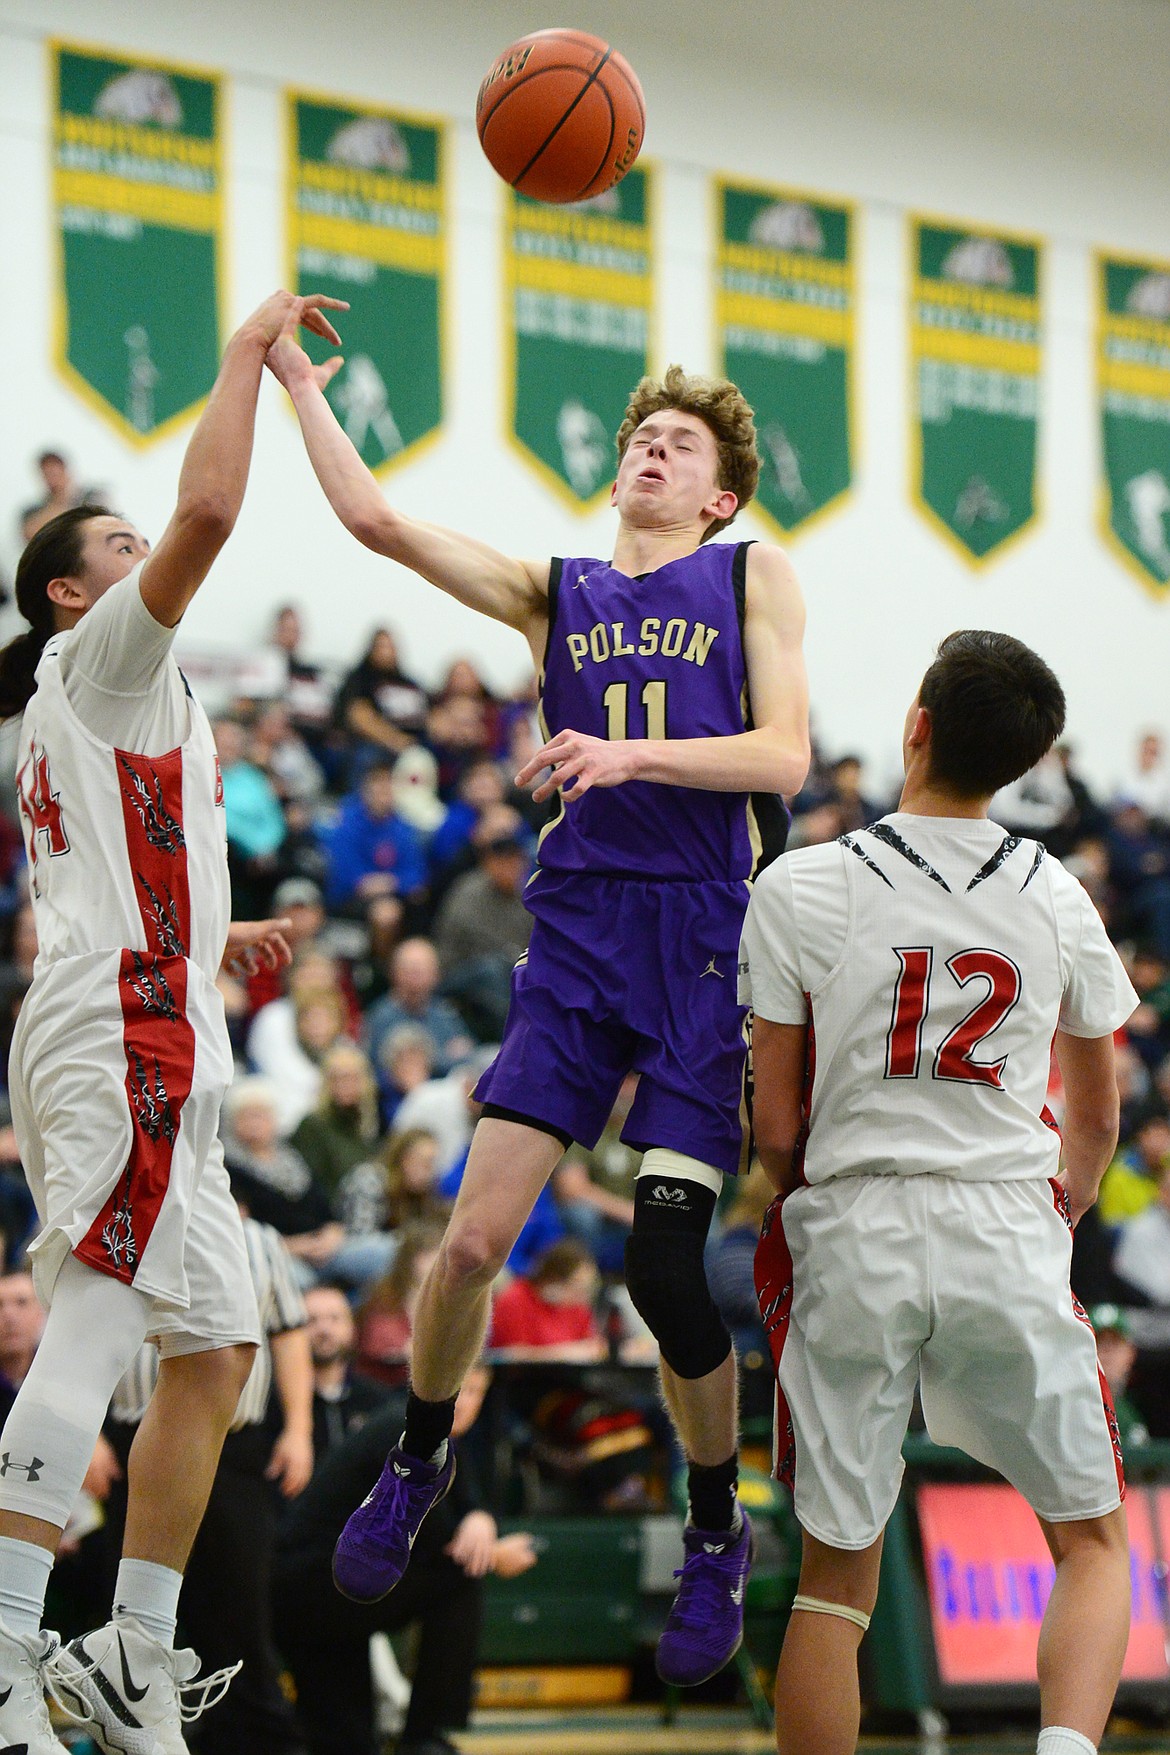 Polson's Robin Erickson (11) drives to the basket between Browning defenders Deion Mad Plume (34) and Ethan Running Crane (12) during the Northwest A District boys' championship game at Whitefish High School on Saturday. Browning won, 78-50. (Casey Kreider/Daily Inter Lake)